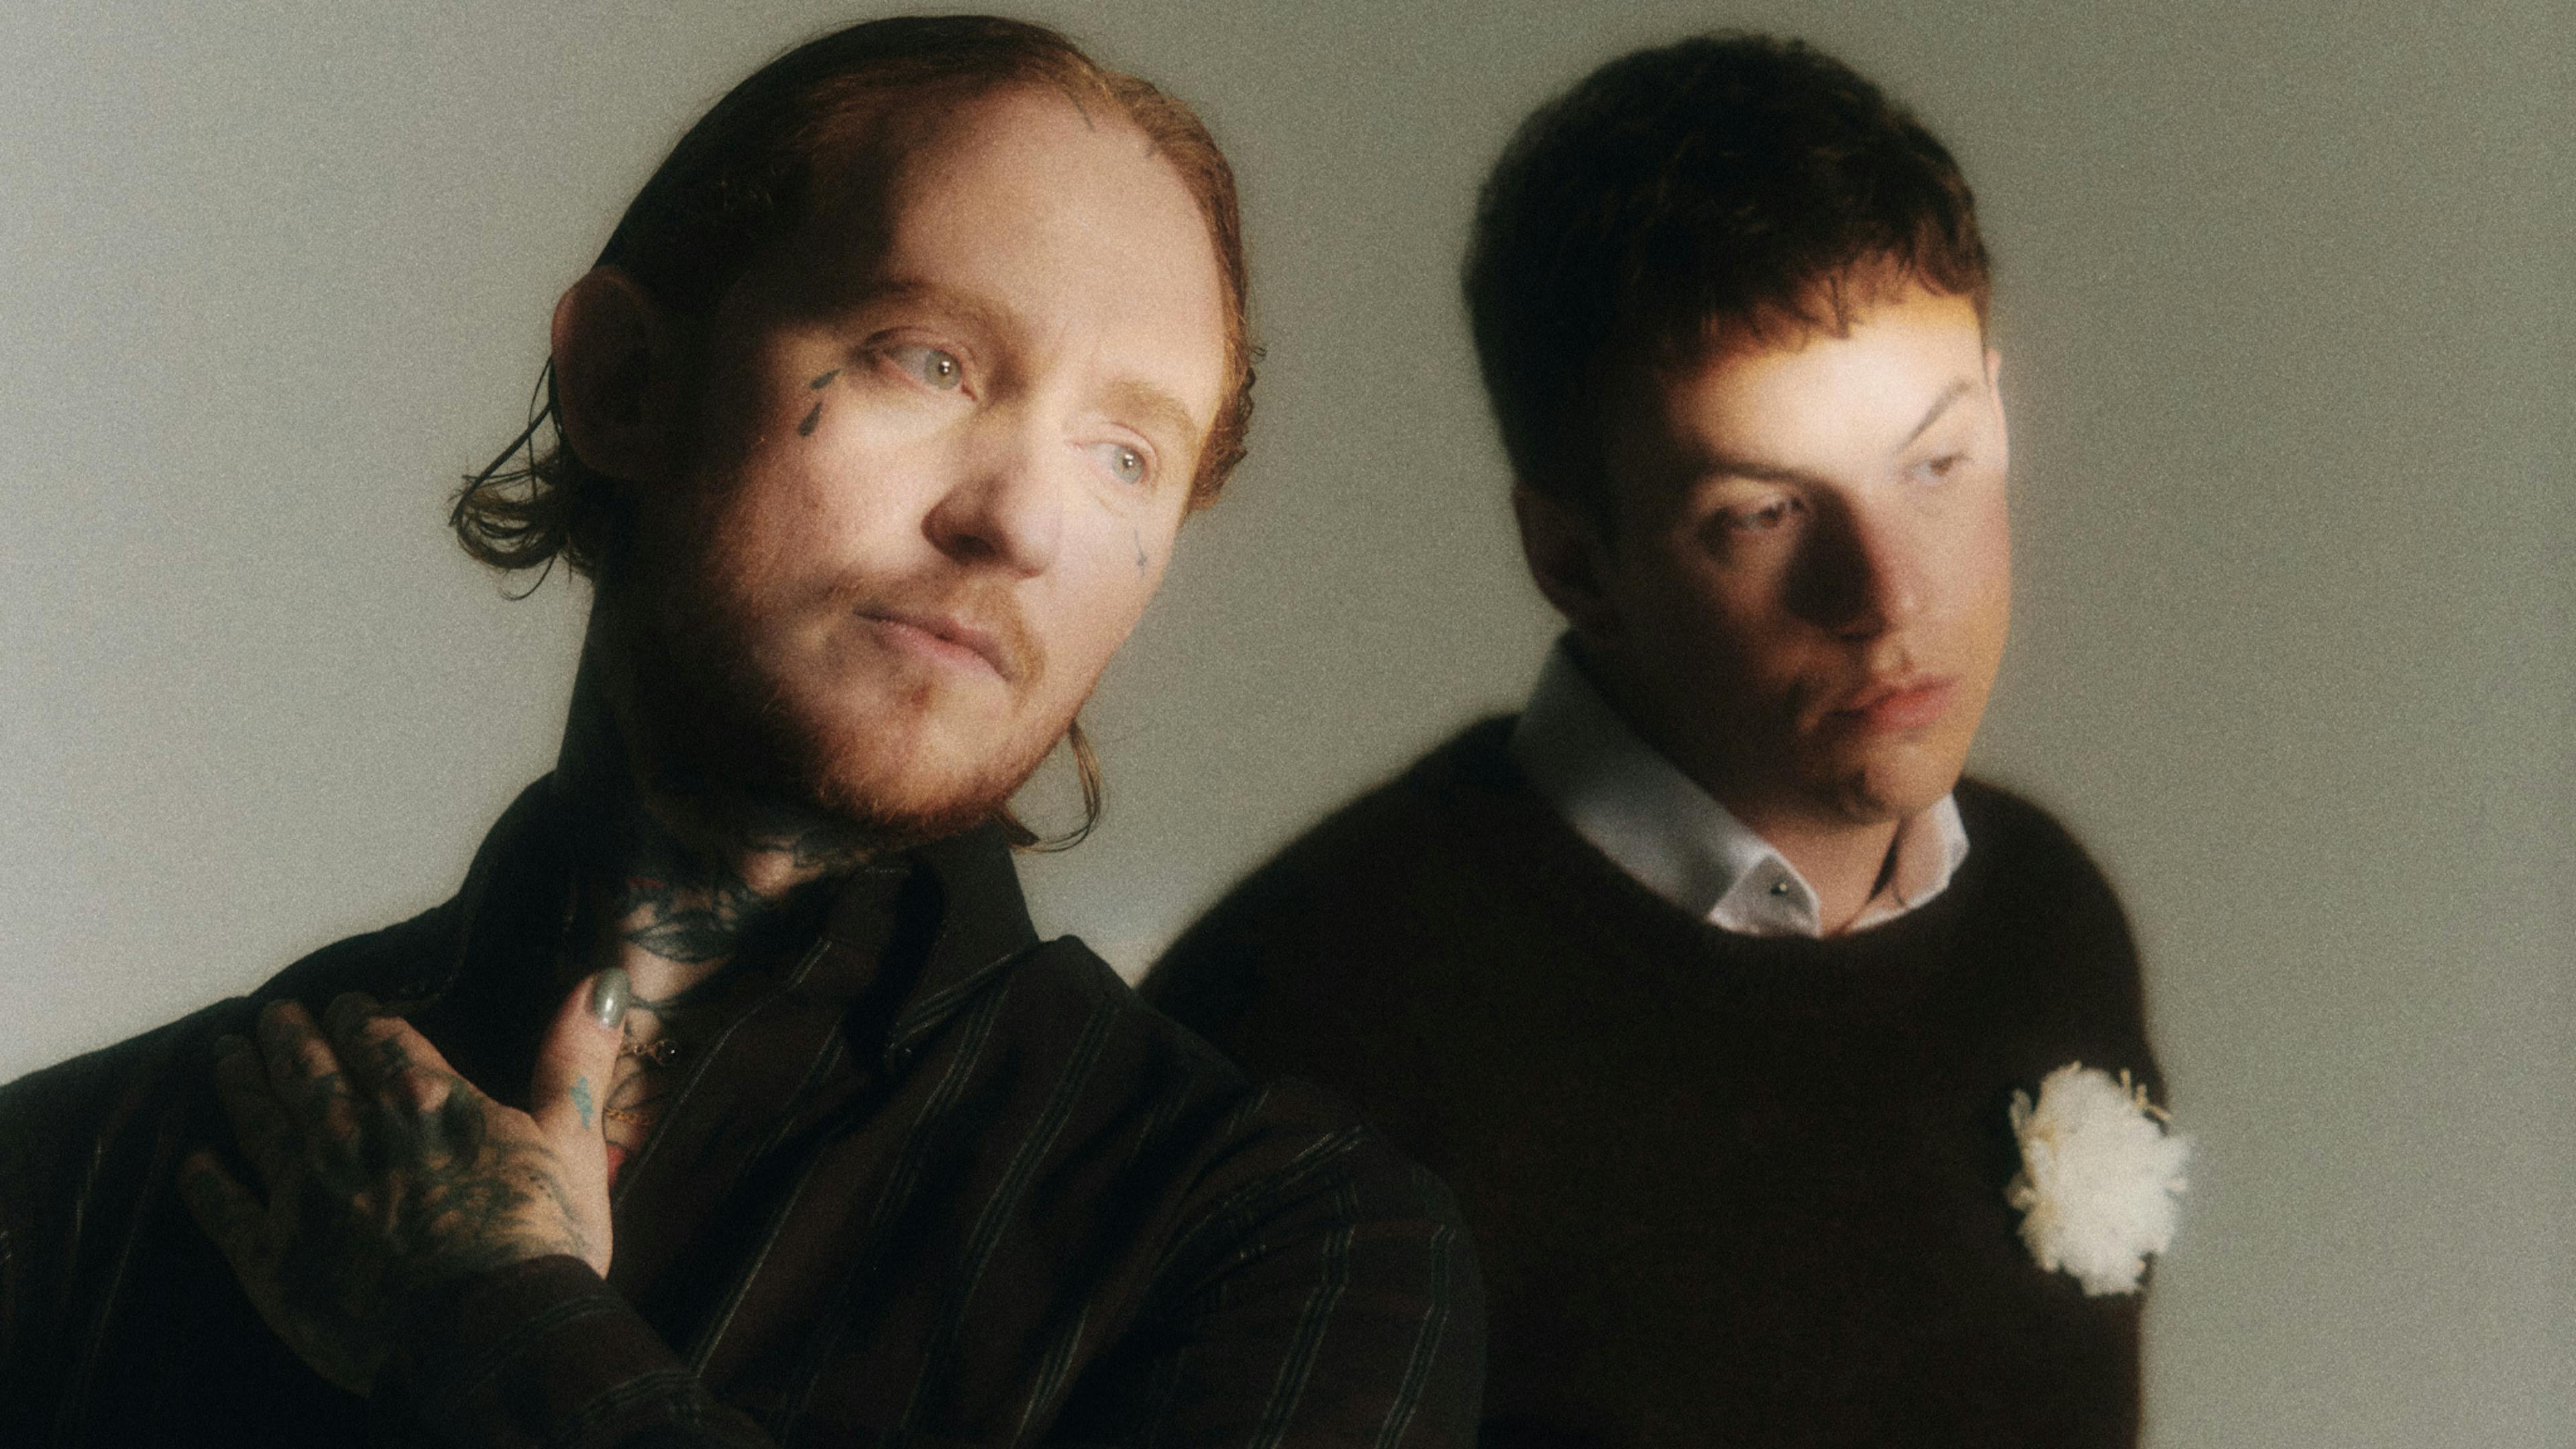 Hear Frank Carter croon on new Rattlesnakes single Man Of The Hour